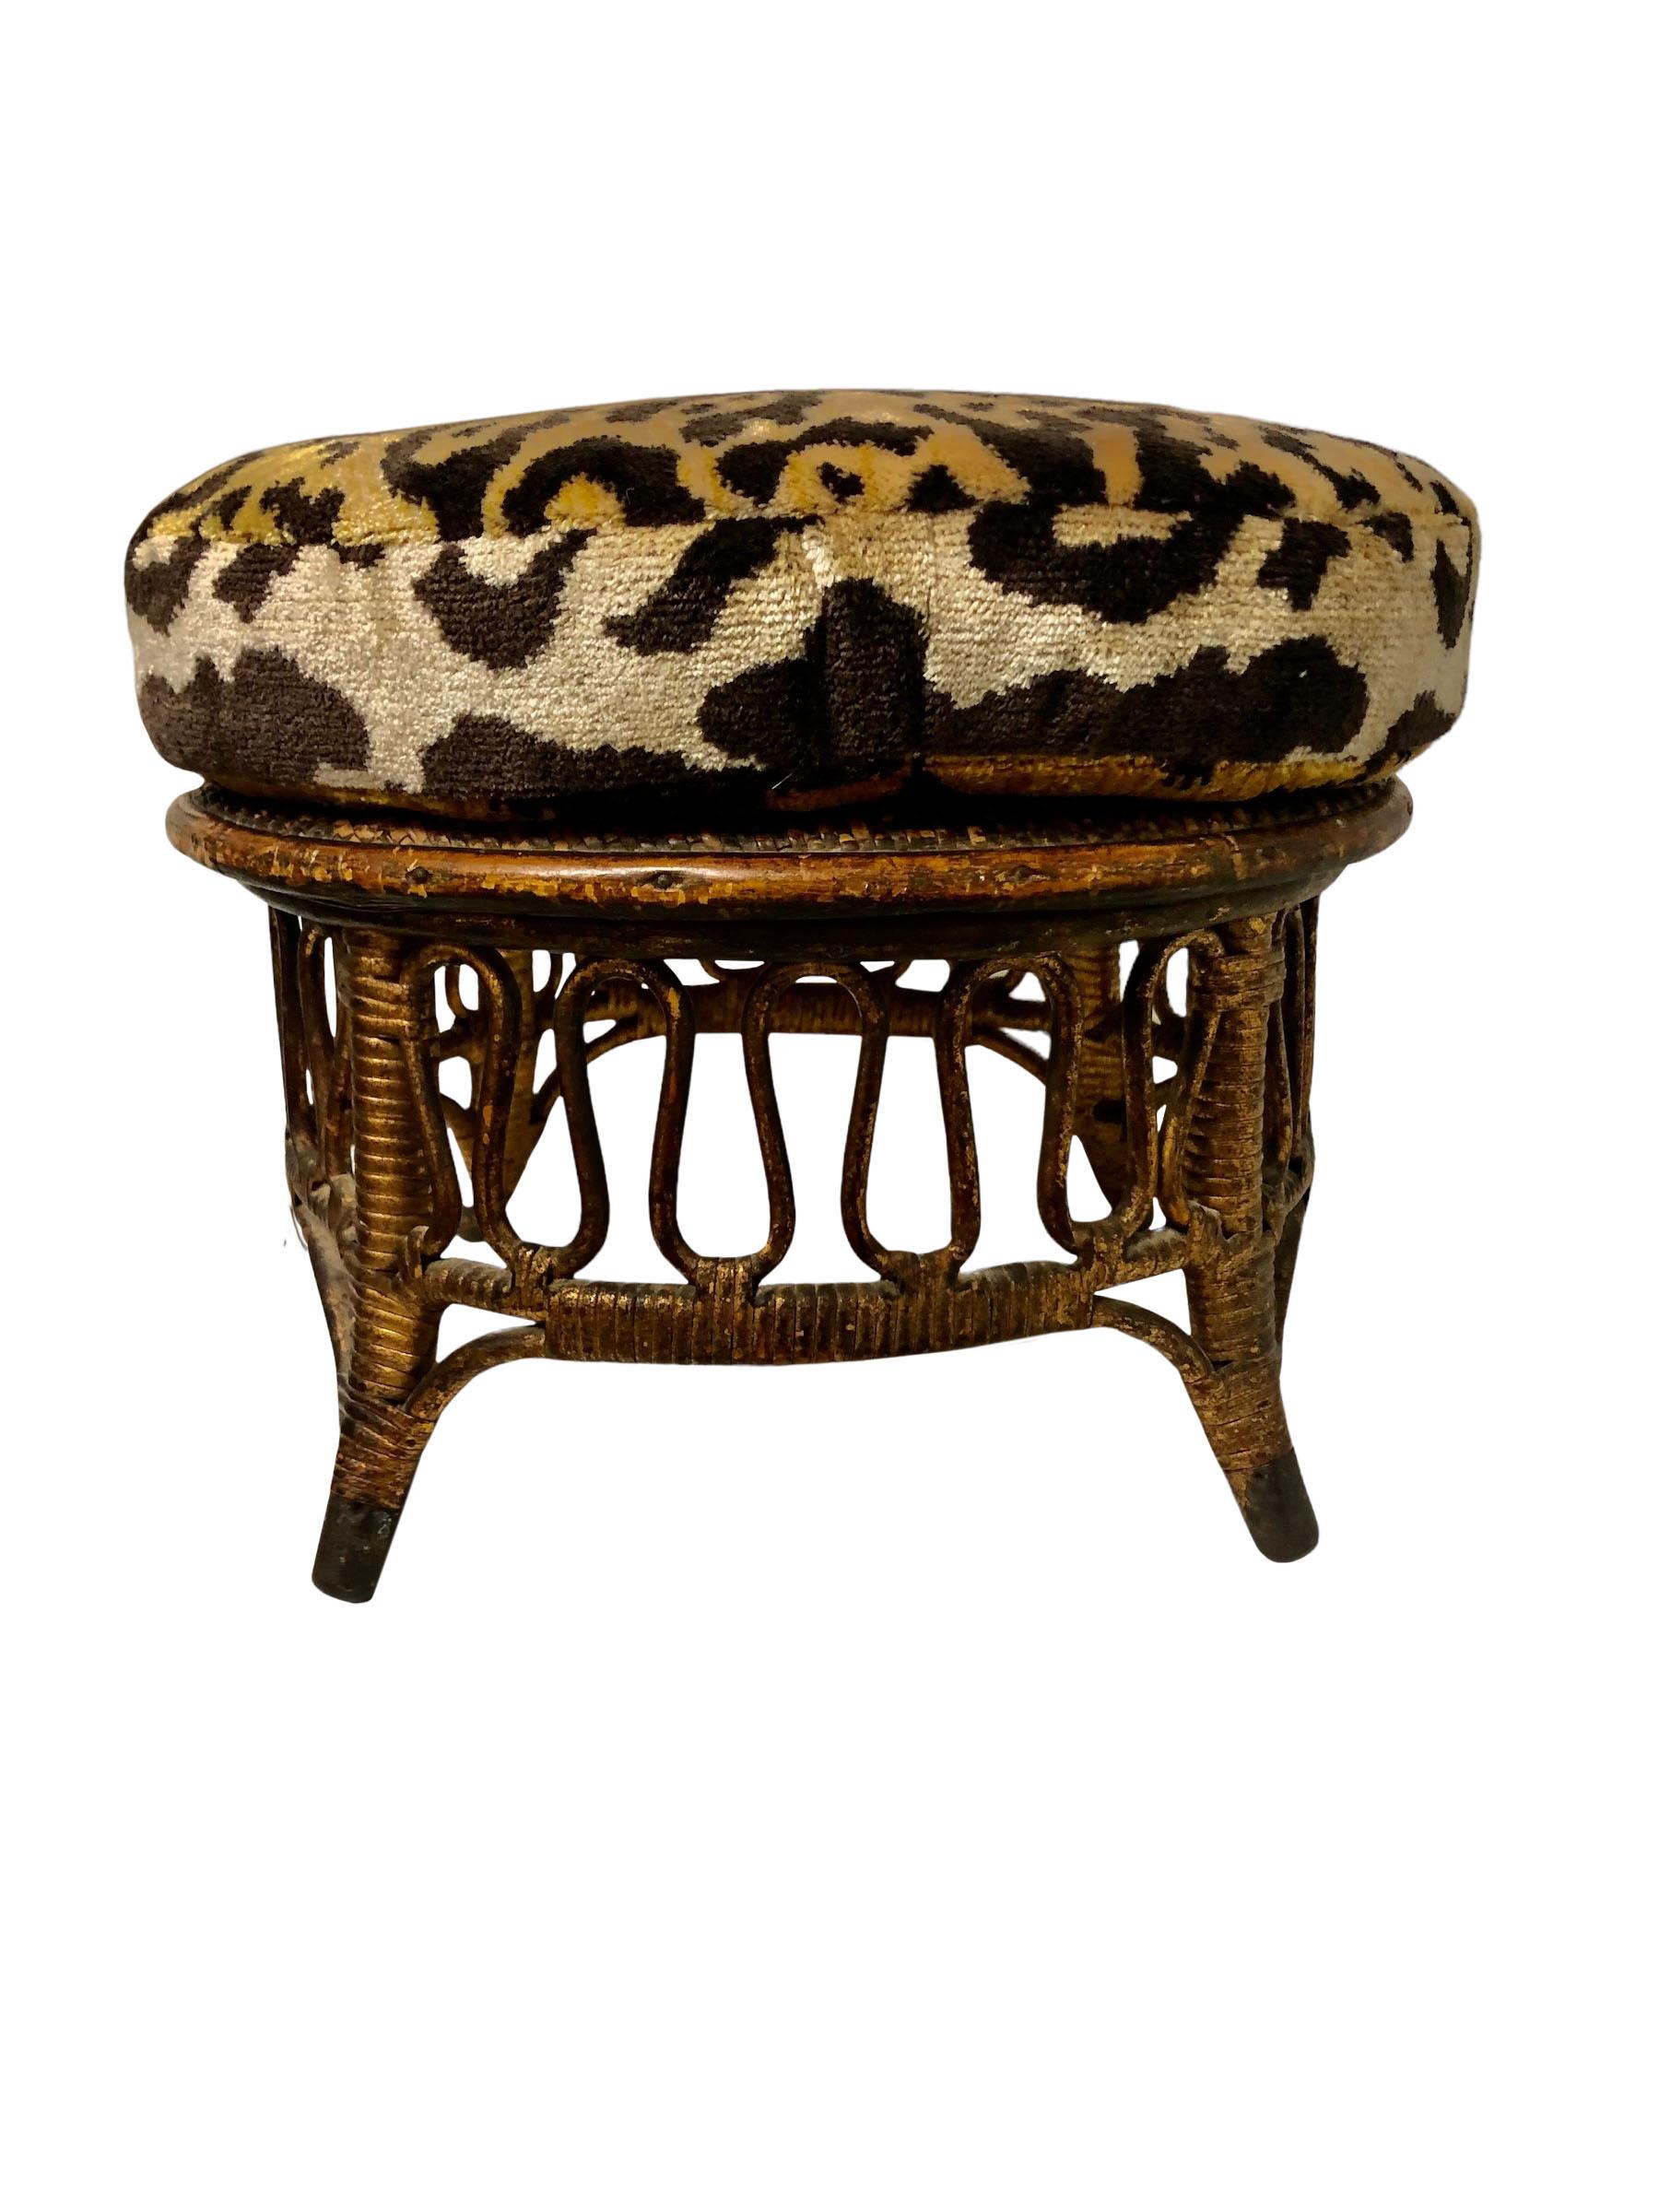 Late 19th Century Haywood Wakefield Stool in Tiger Velvet Upholstery For Sale